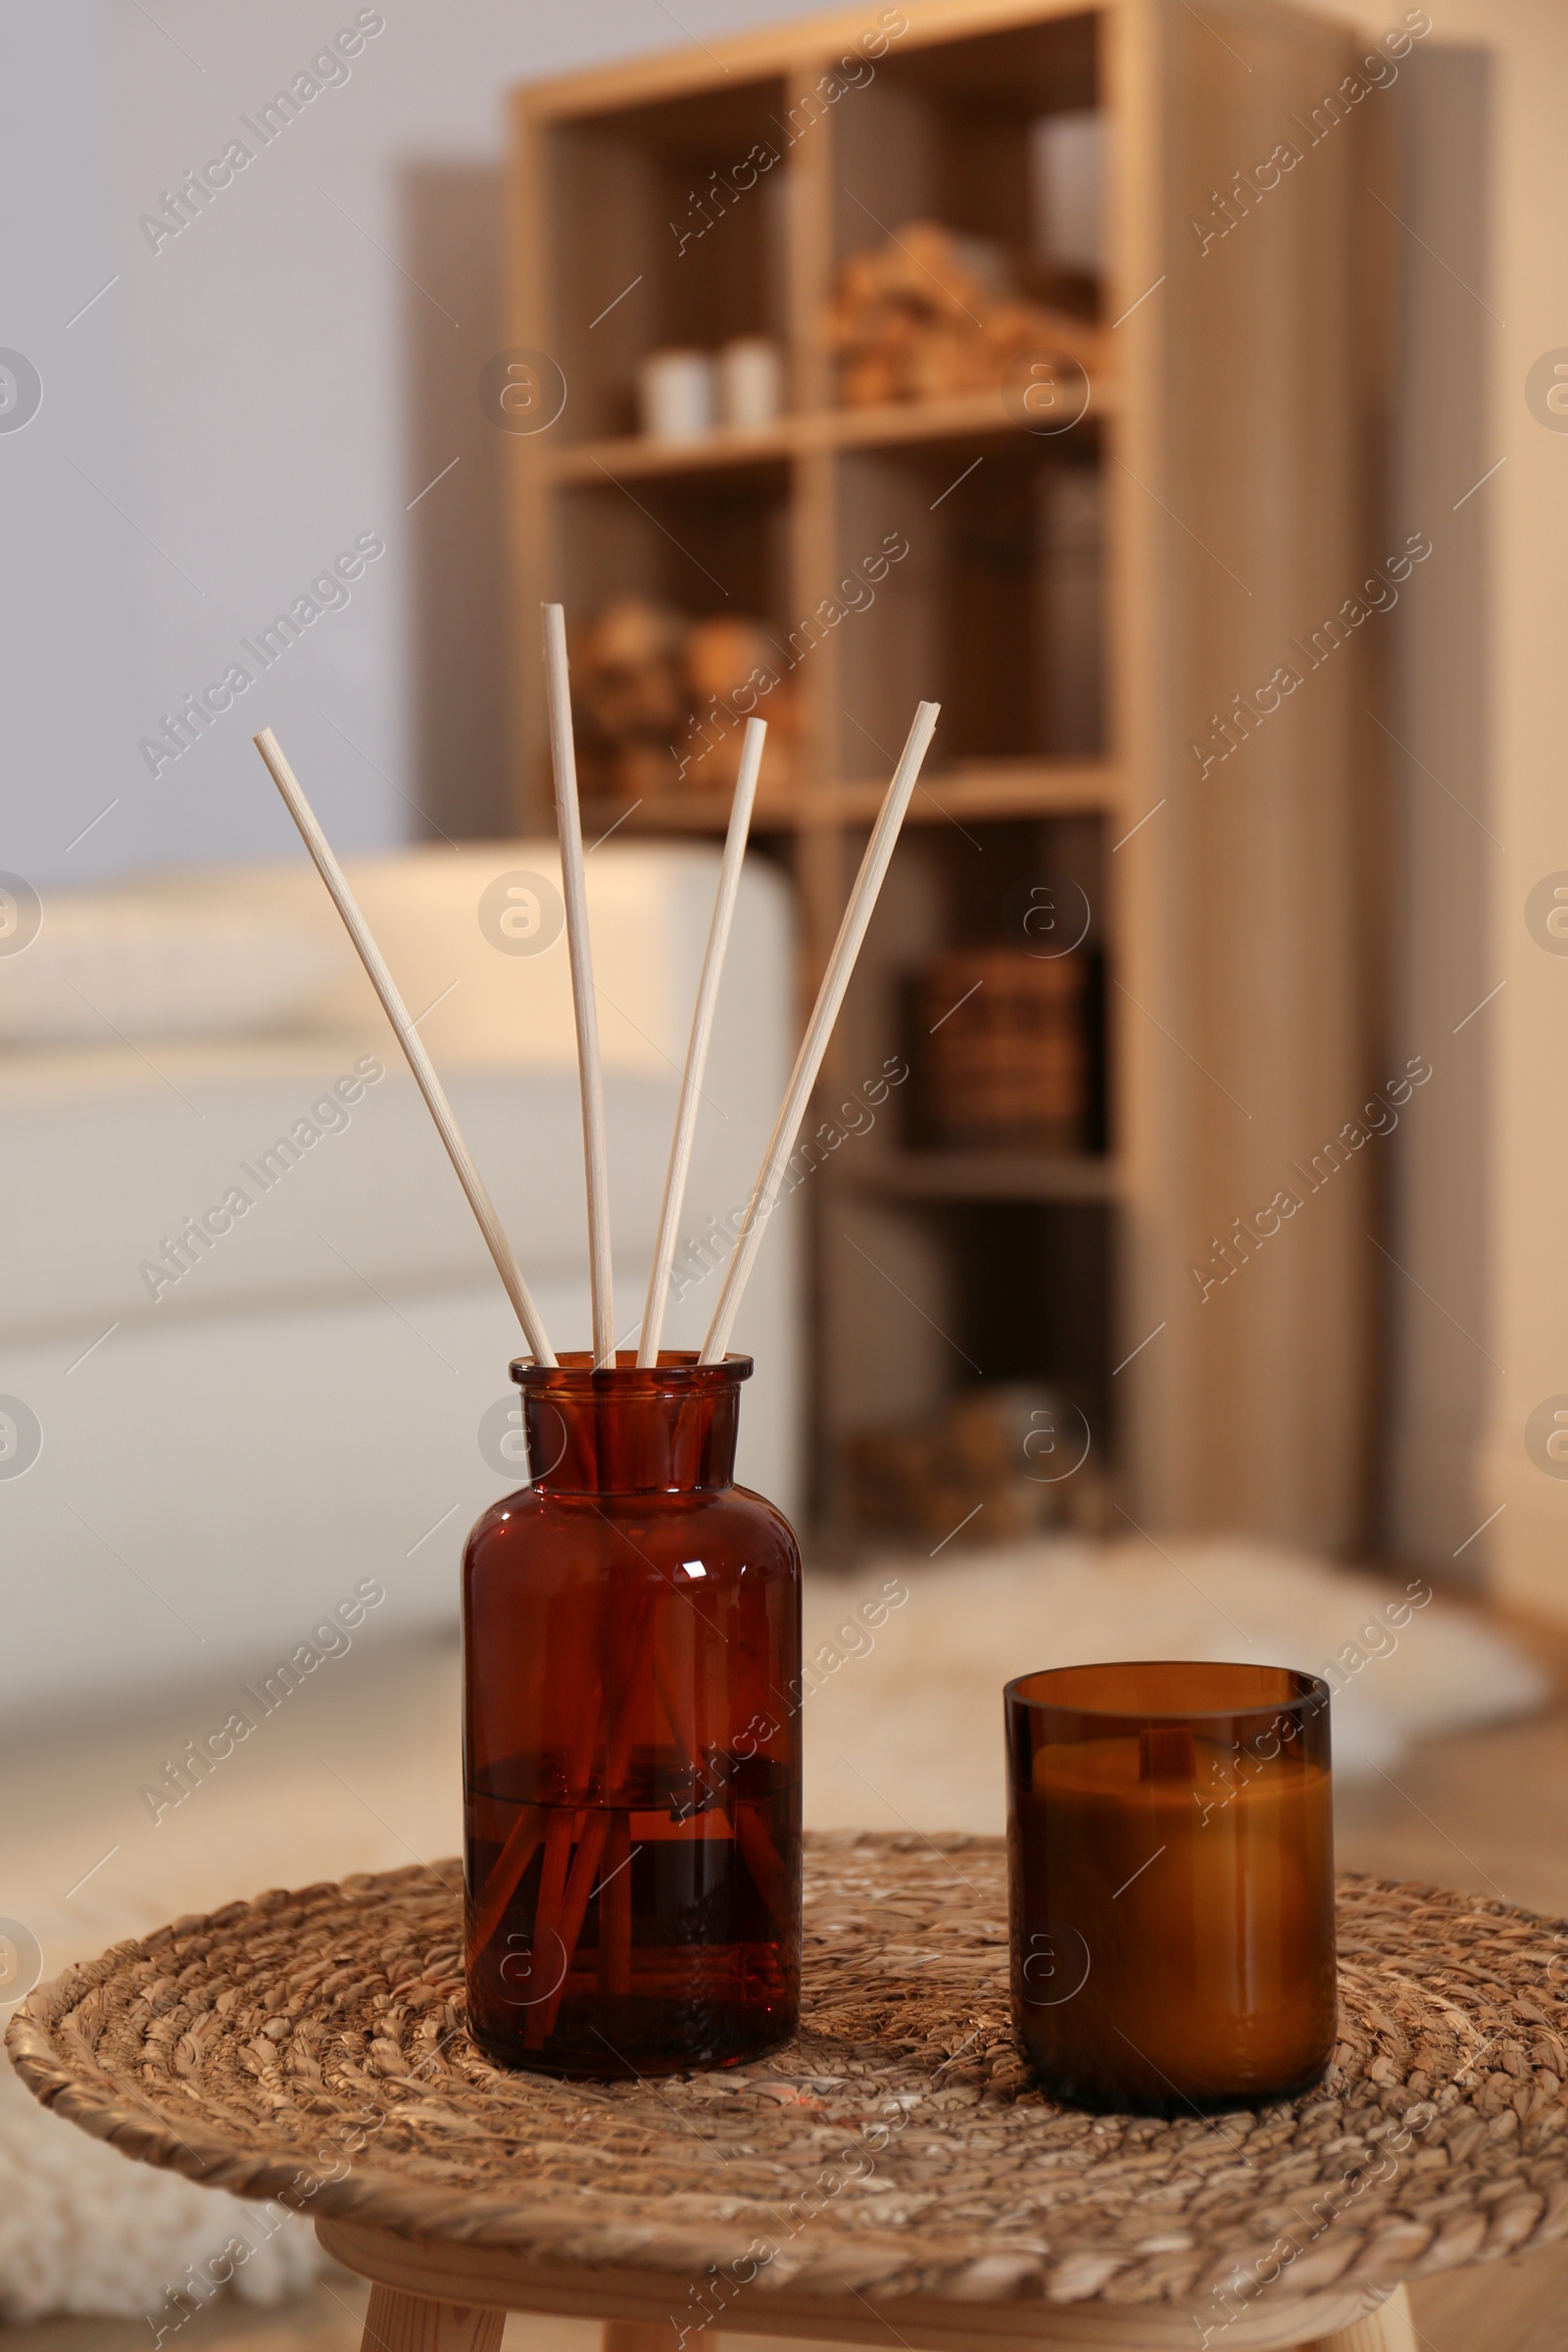 Photo of Aromatic reed air freshener and candle on wicker tray in room